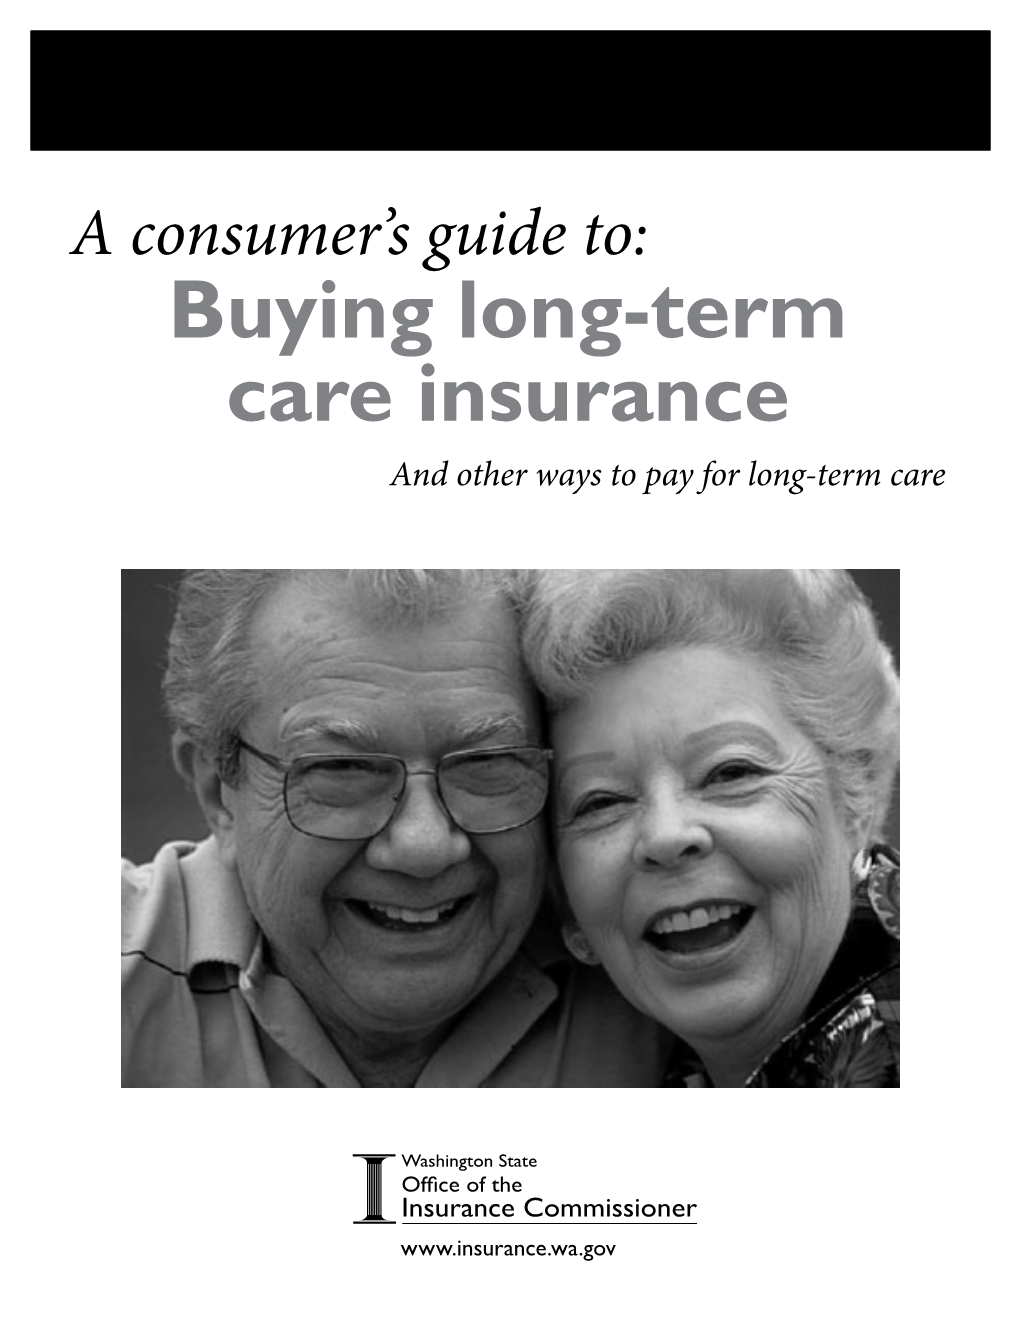 A Consumer's Guide To: Buying Long-Term Care Insurance